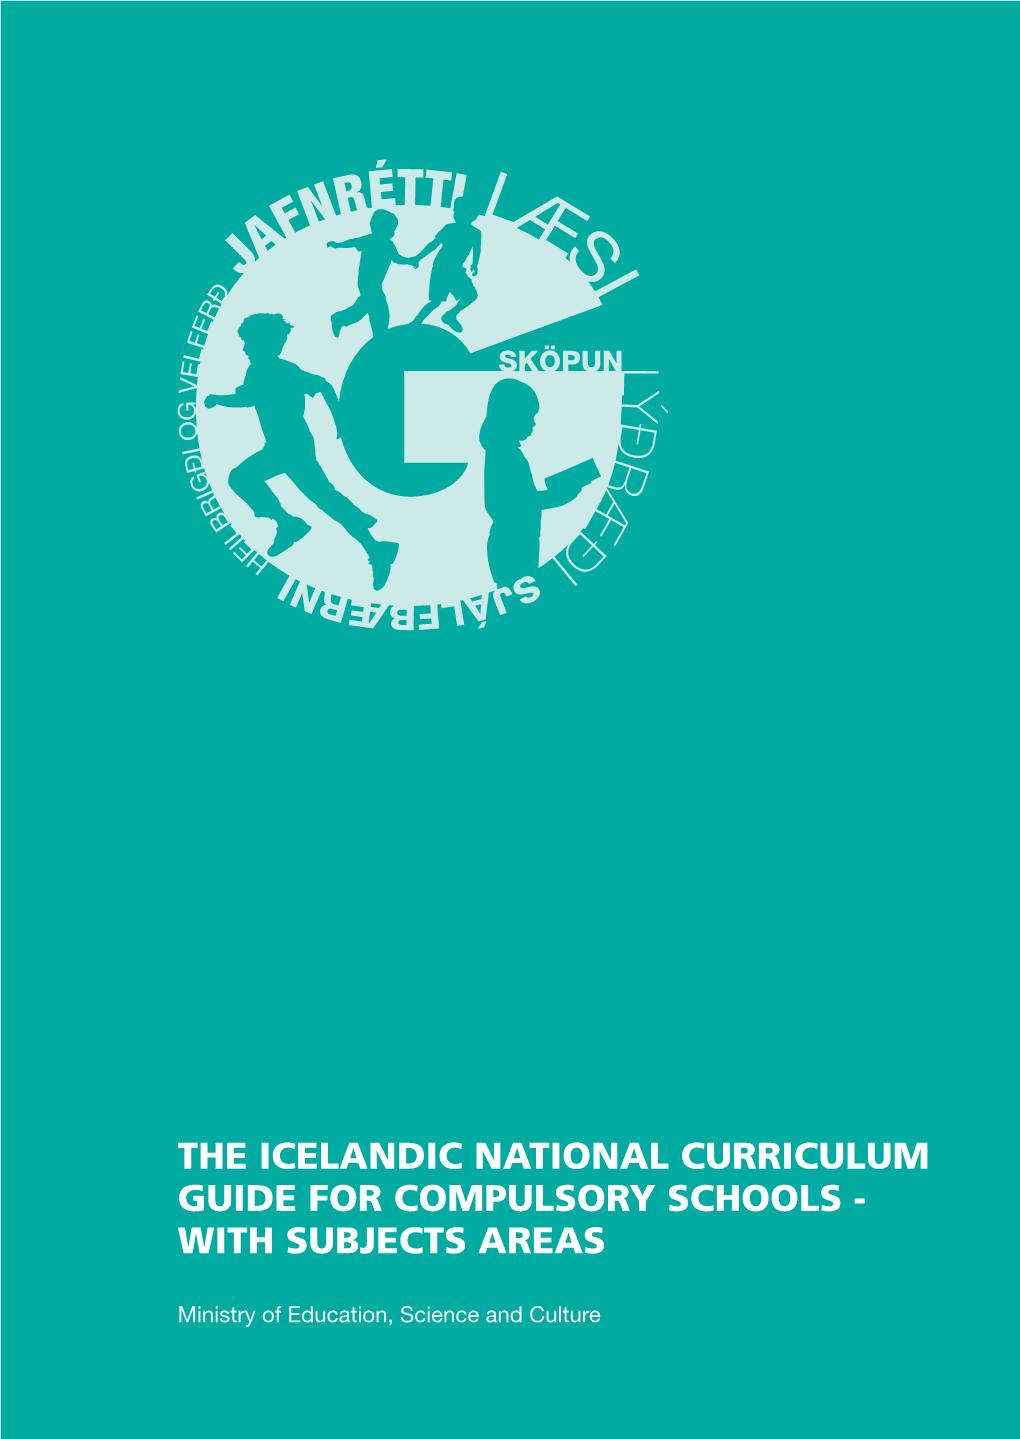 The Icelandic National Curriculum Guide for Compulsory Schools - with Subjects Areas